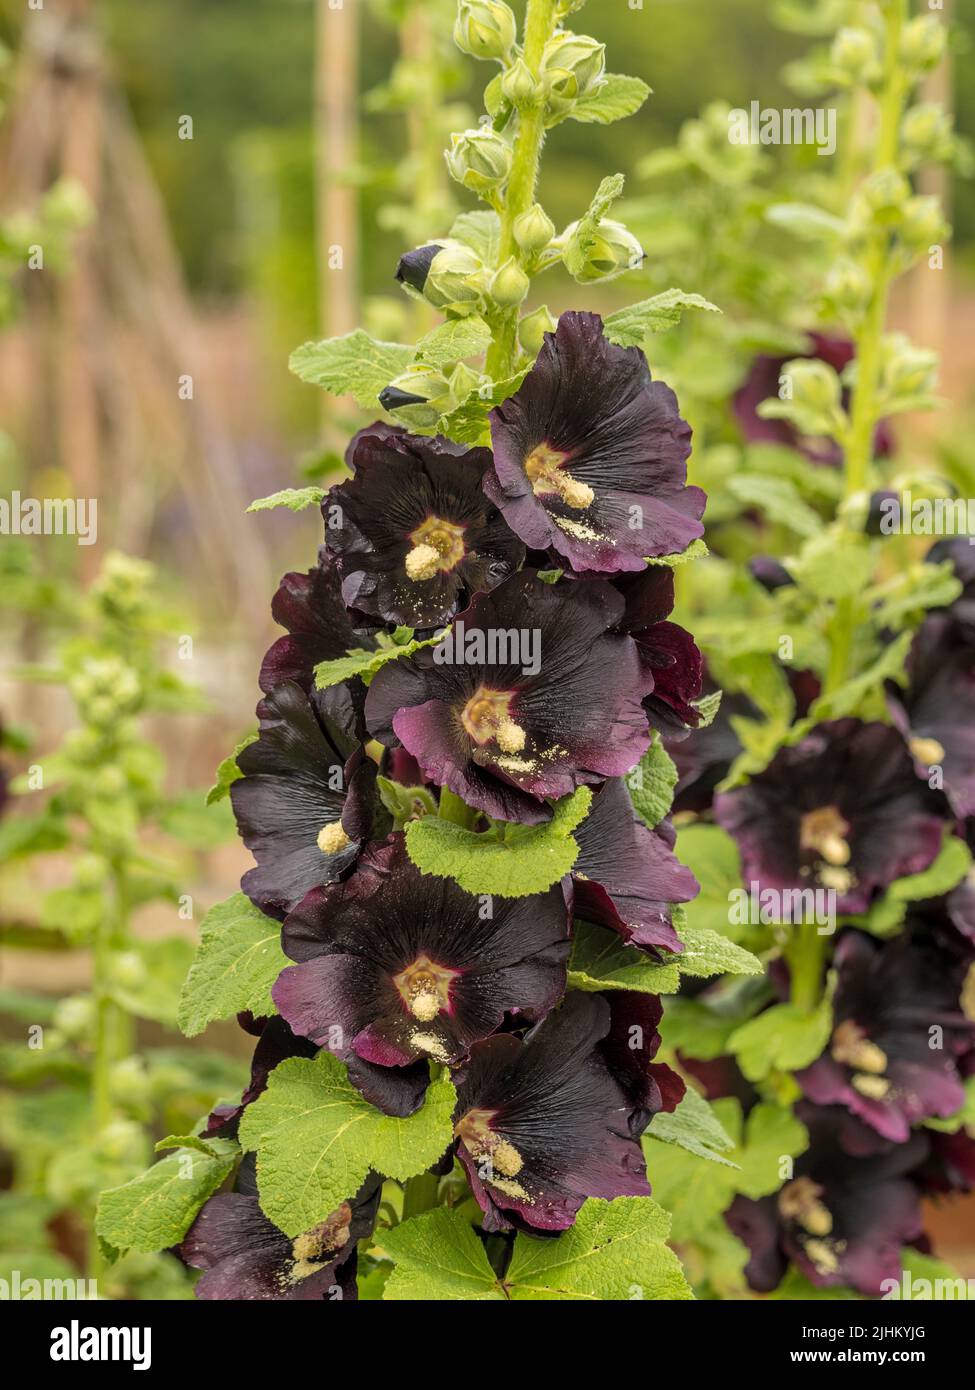 The dark maroon coloured flowers of Alcea rosea 'Nigra' commonly known as Hollyhock growin in a UK garden. Stock Photo